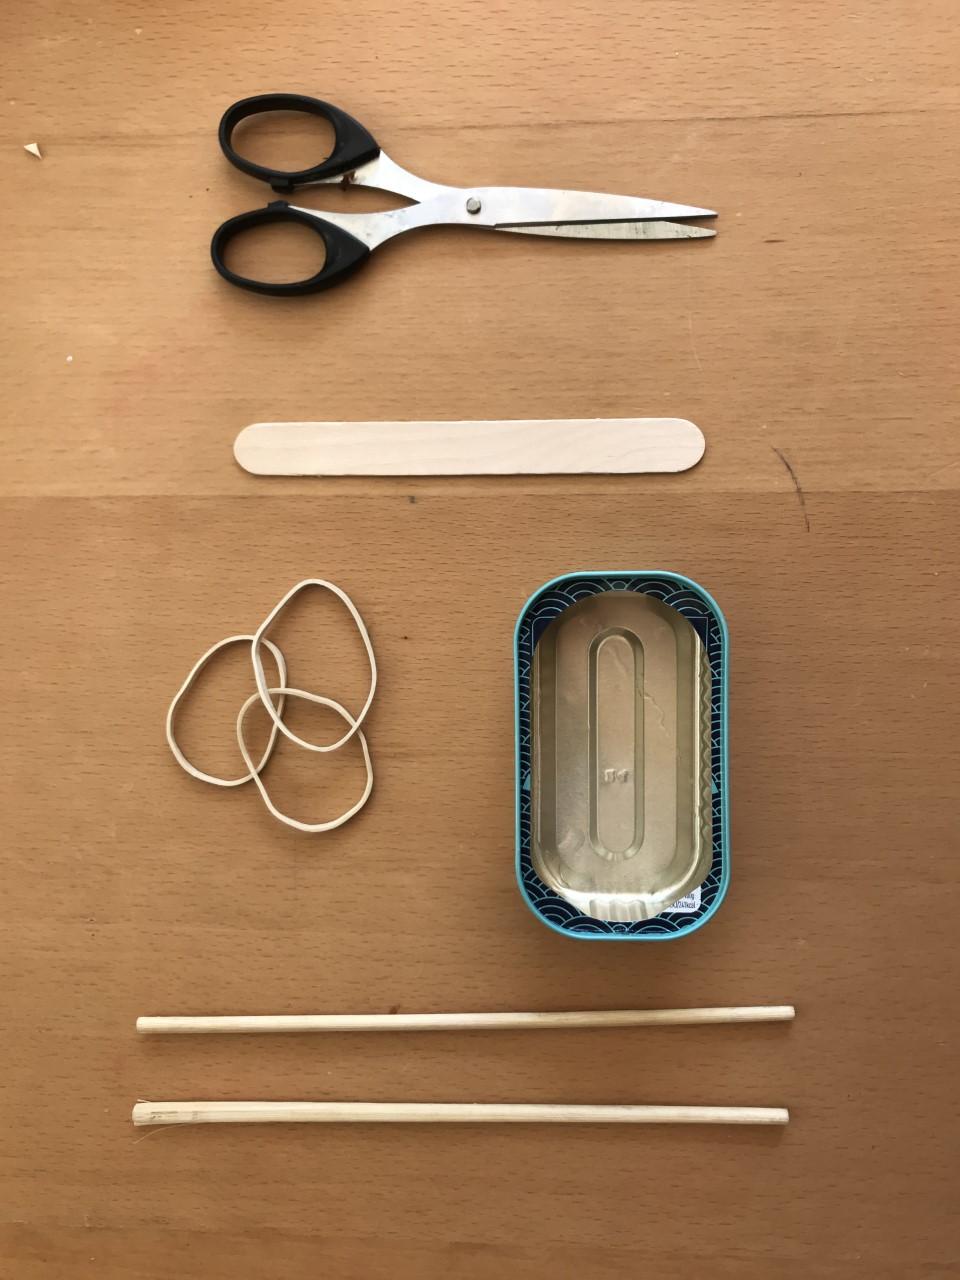 (Source of Lolly pop sticks Scissors Mackerel tin (ask a parent to cover the sharp edge or use a margarine tub) Elastic bands 2 chopsticks or old pencils picture)